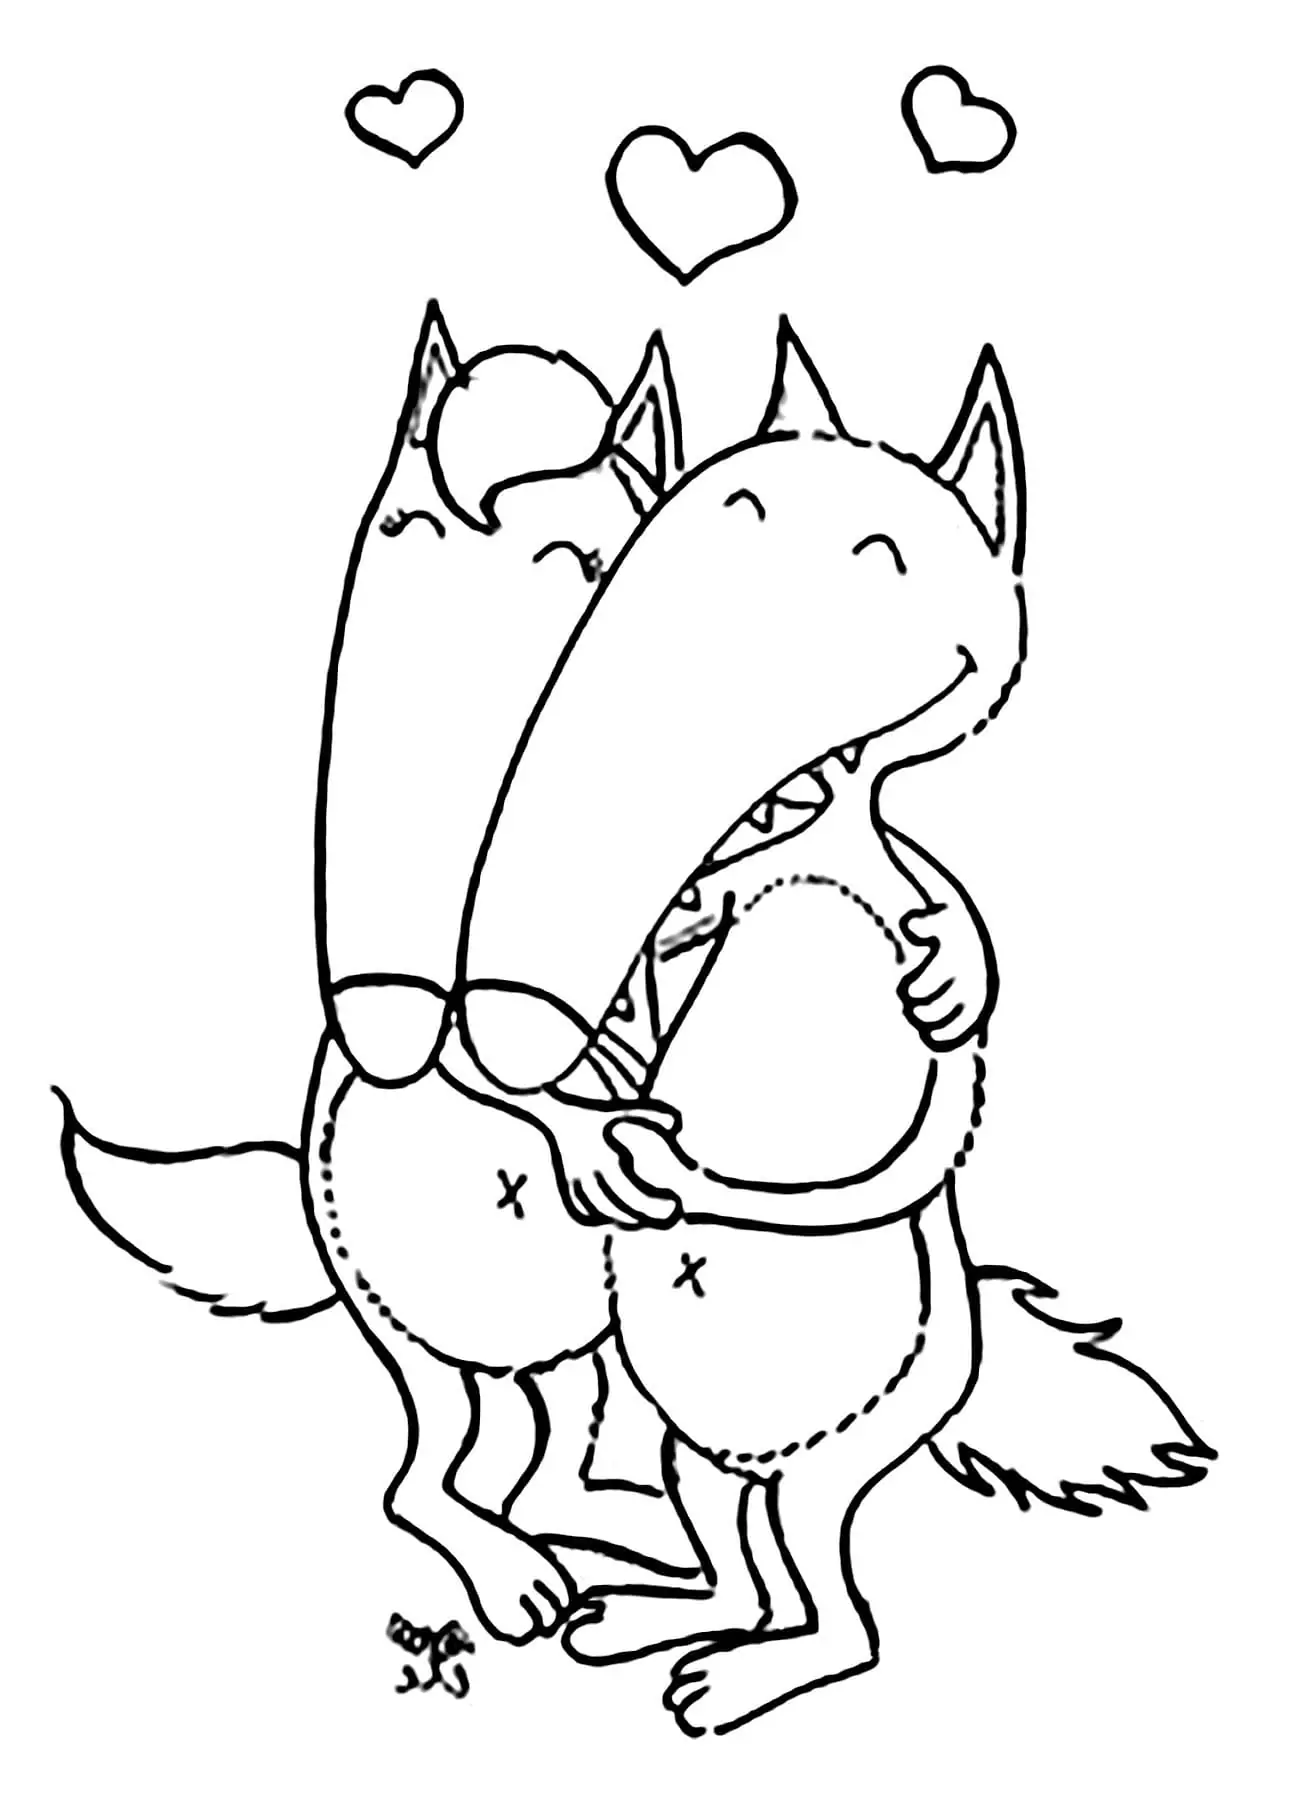 Printable Wolf Coloring Page - Free Printable Coloring Pages for Kids